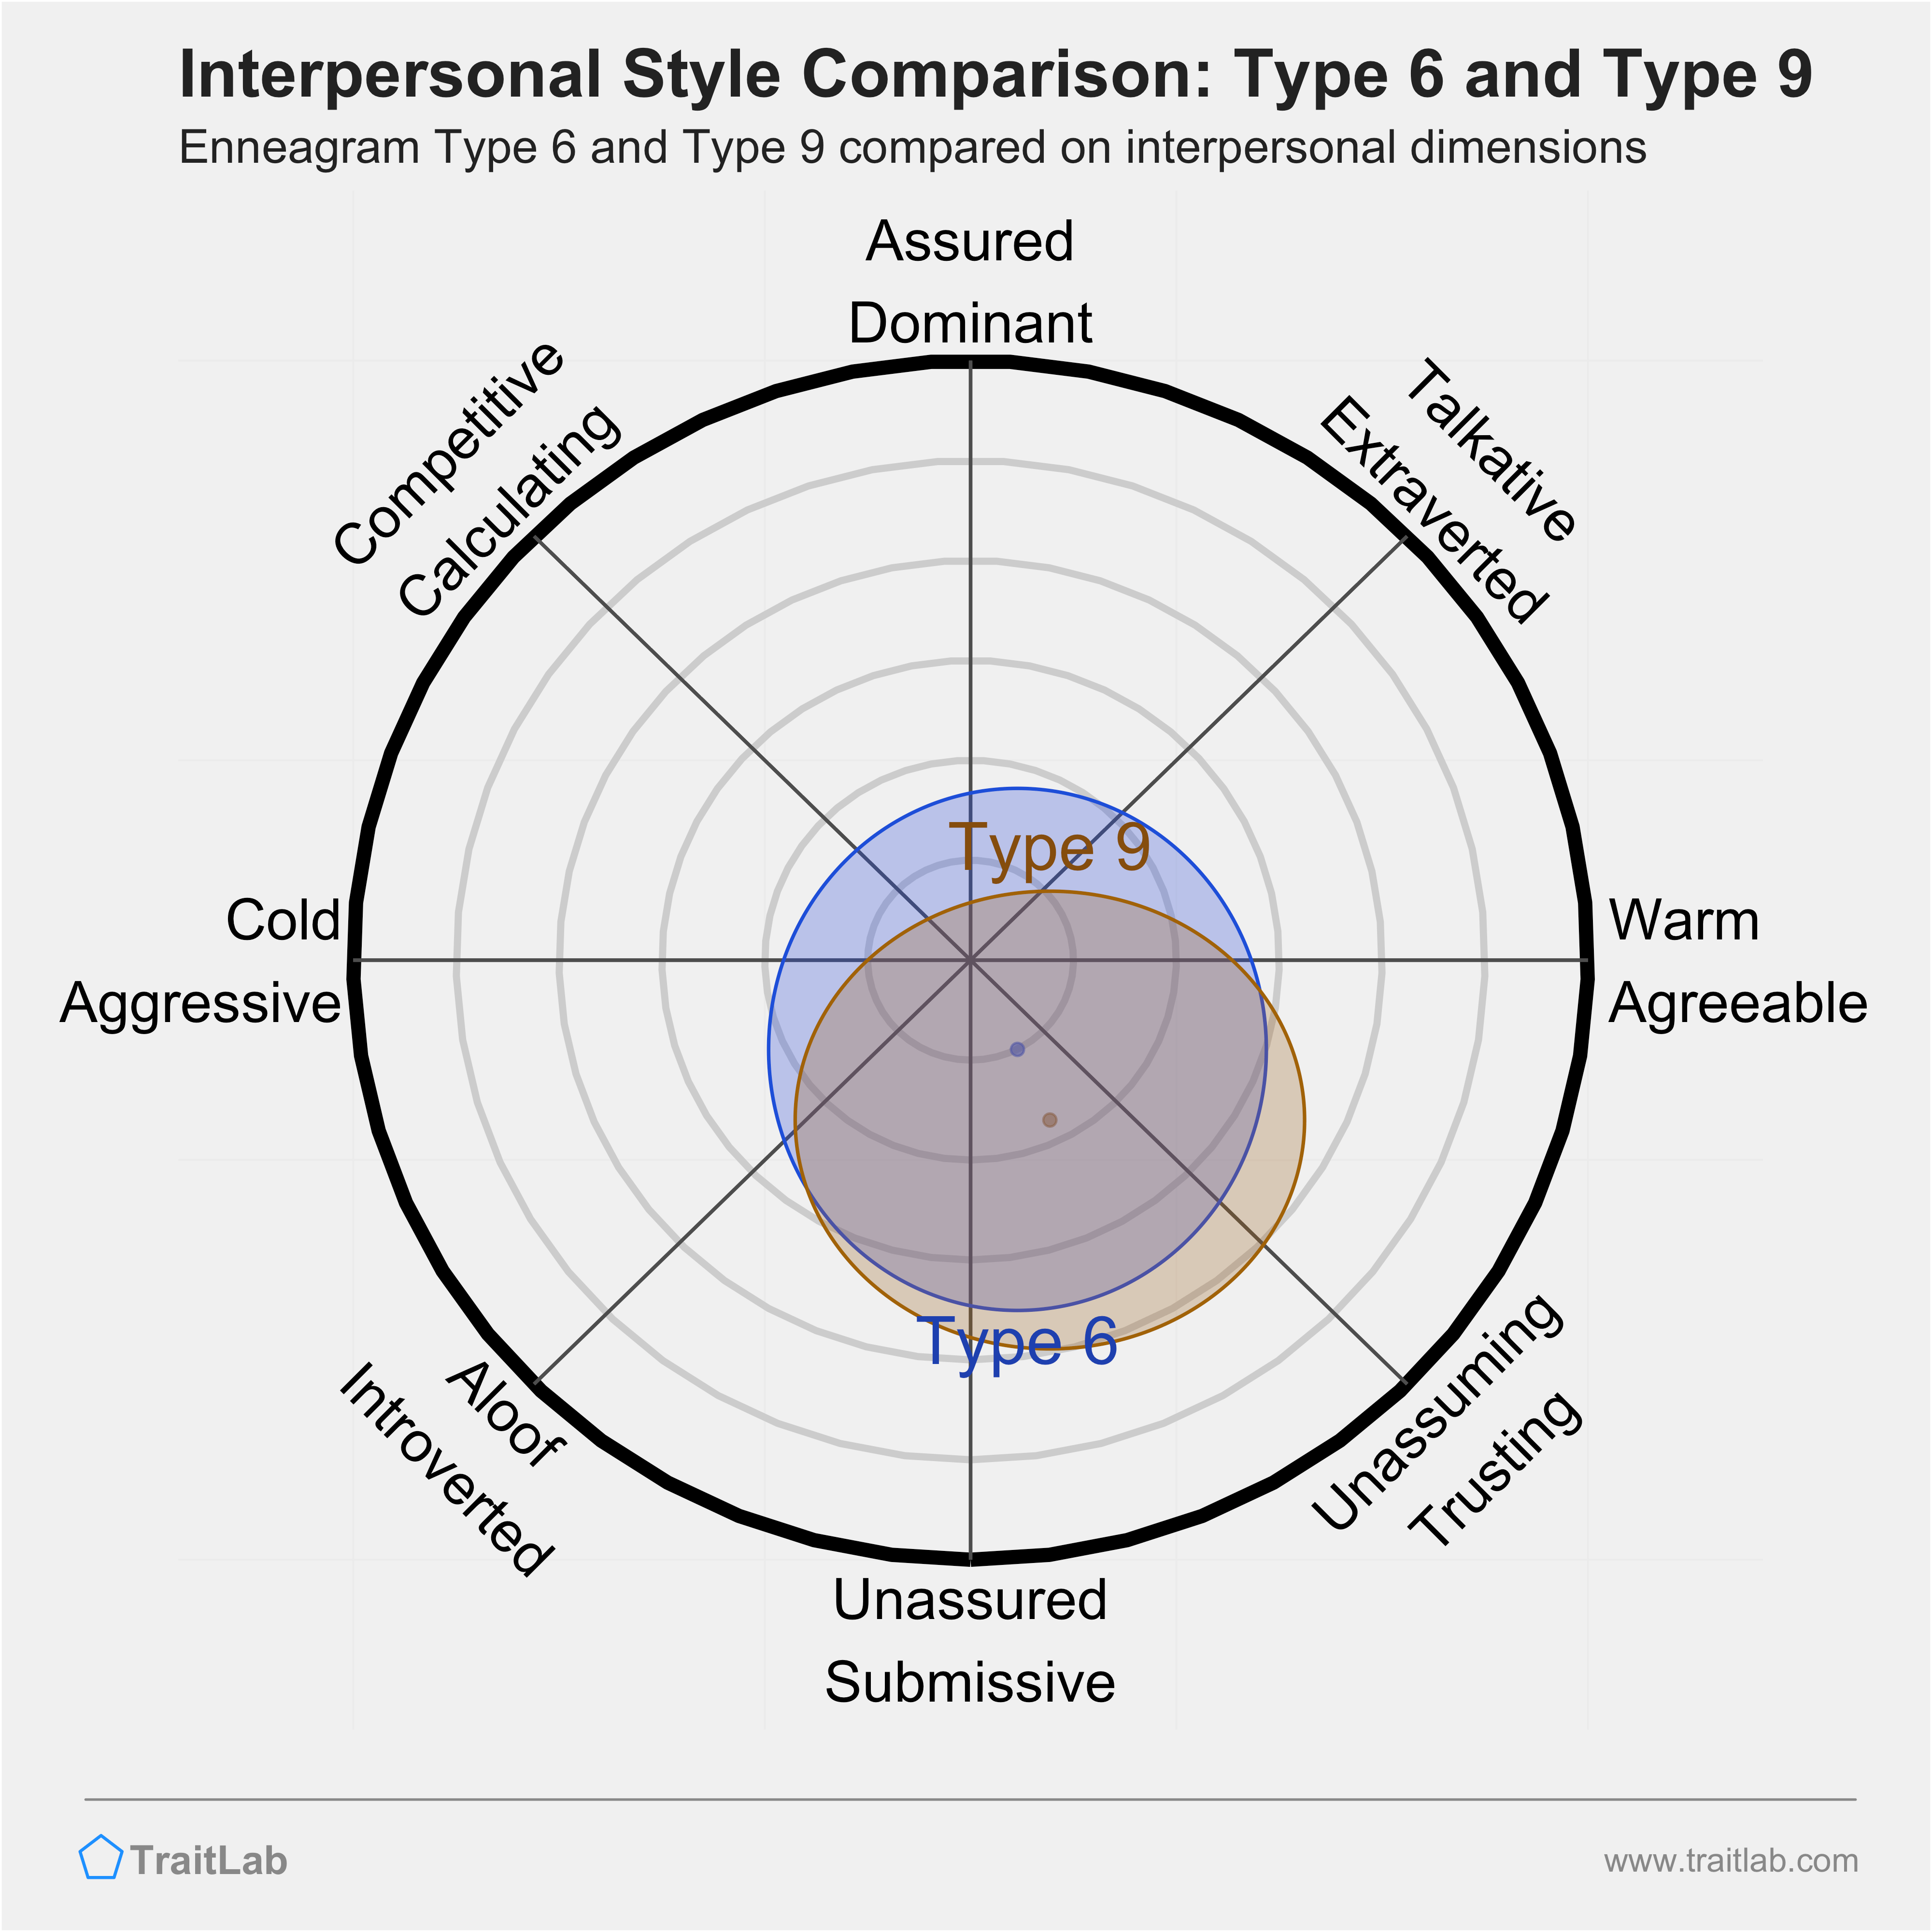 Enneagram Type 6 and Type 9 comparison across interpersonal dimensions